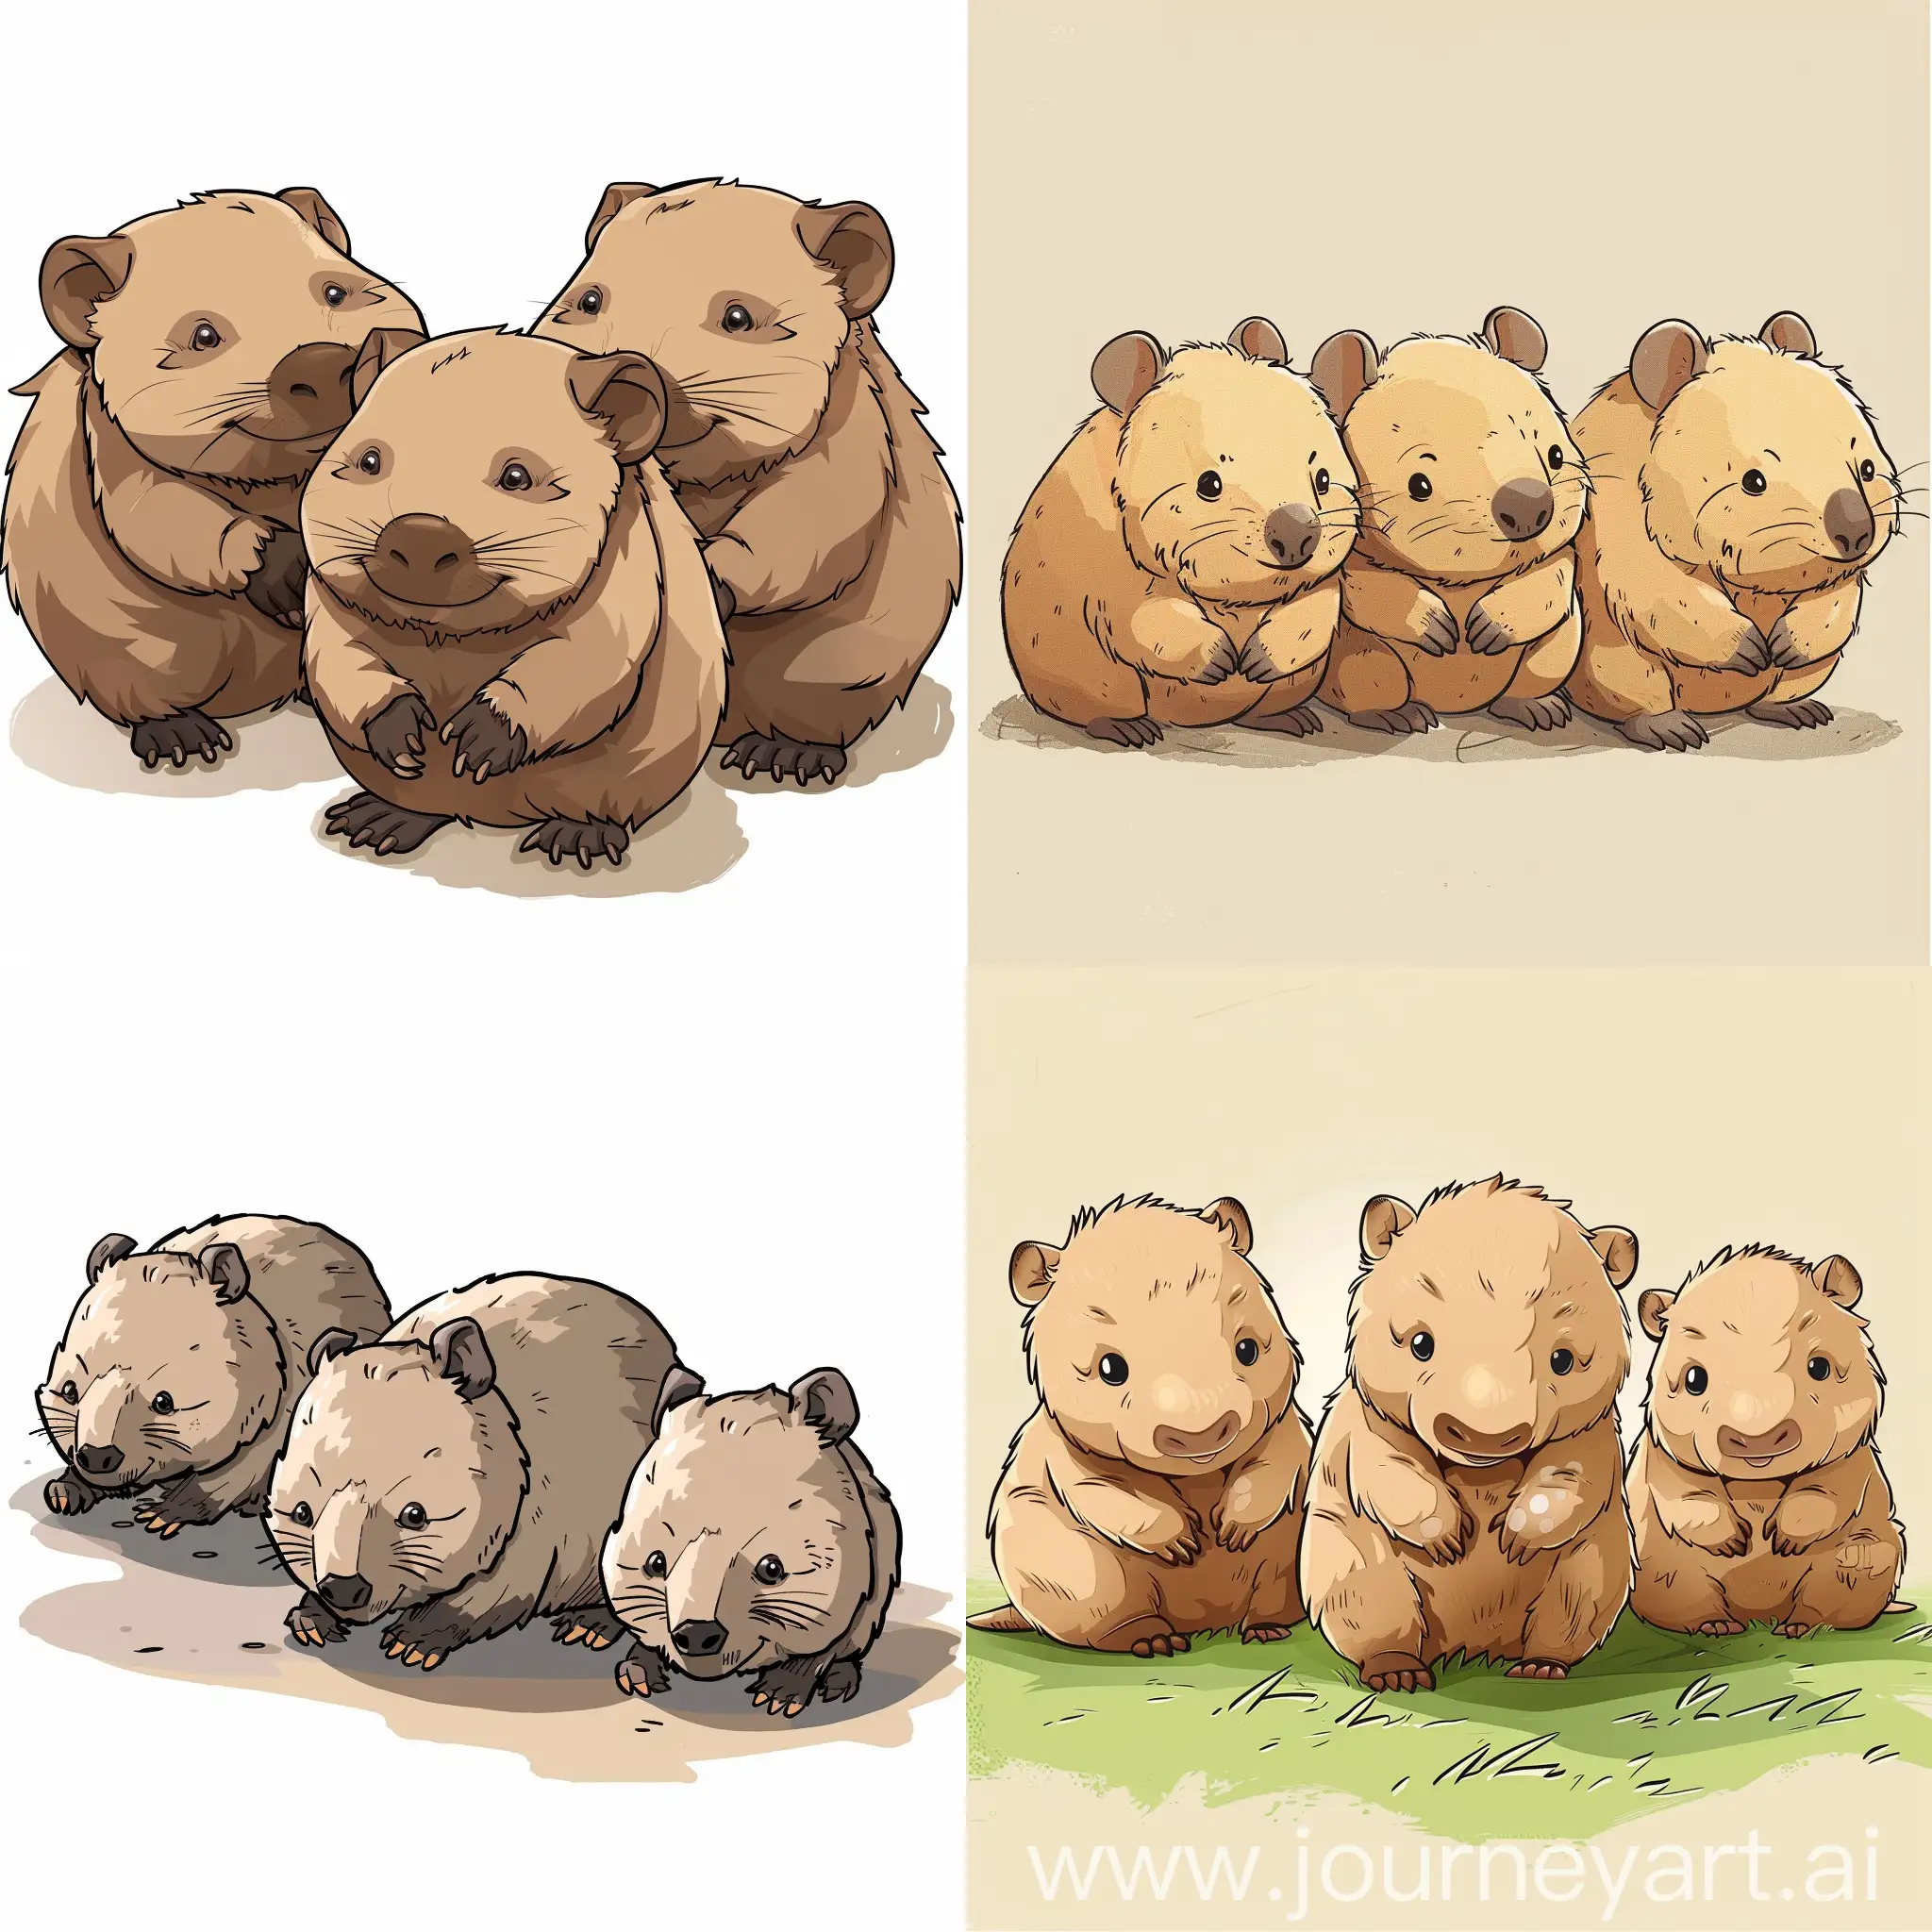 Cartoon of 3 young wombats 